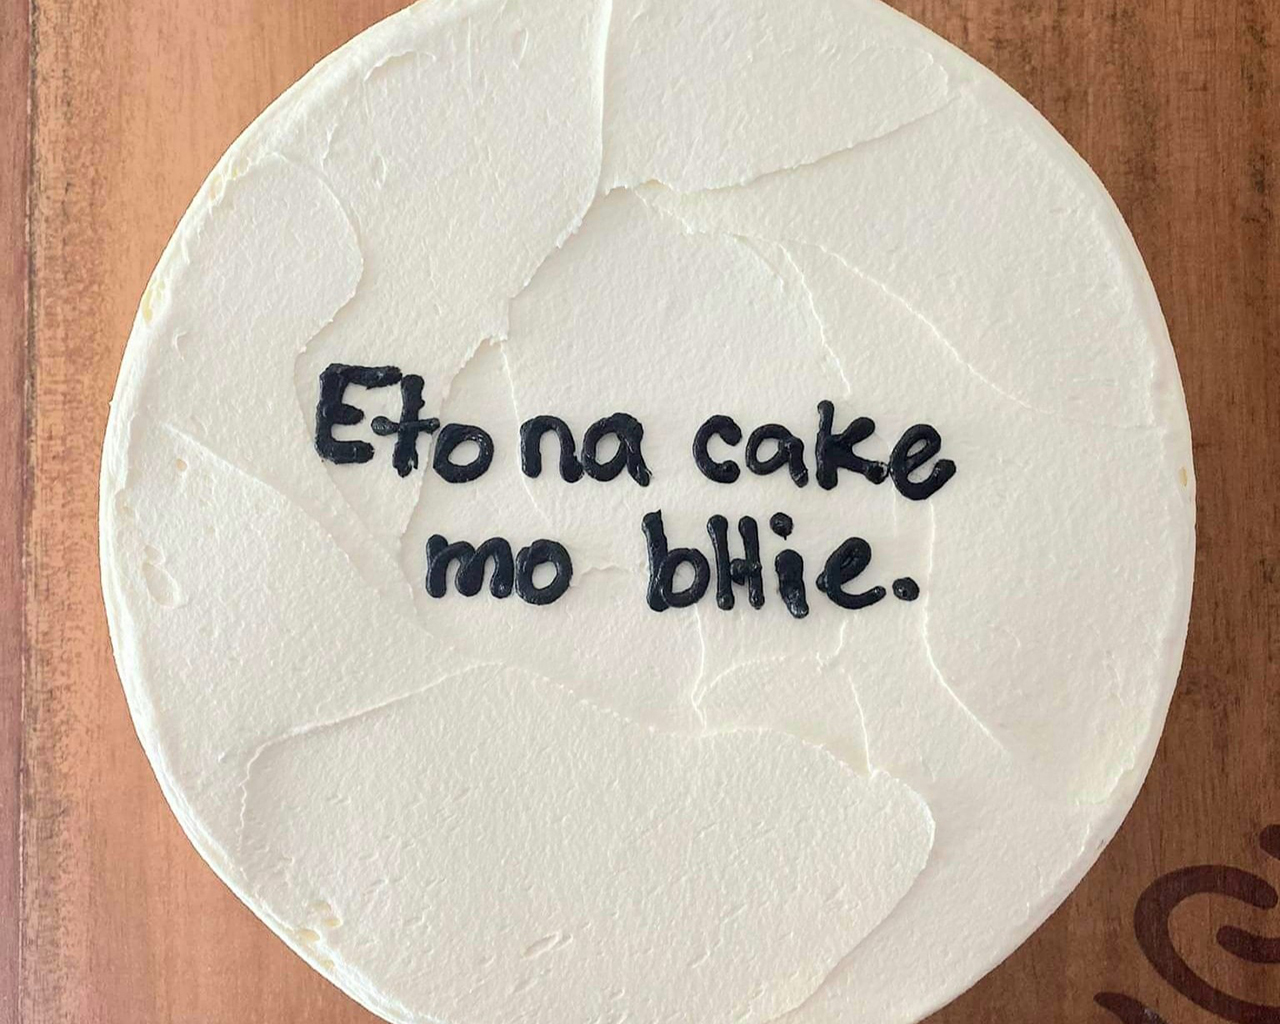 144 Funny Birthday Cake Messages That WIll Make Them Smile!